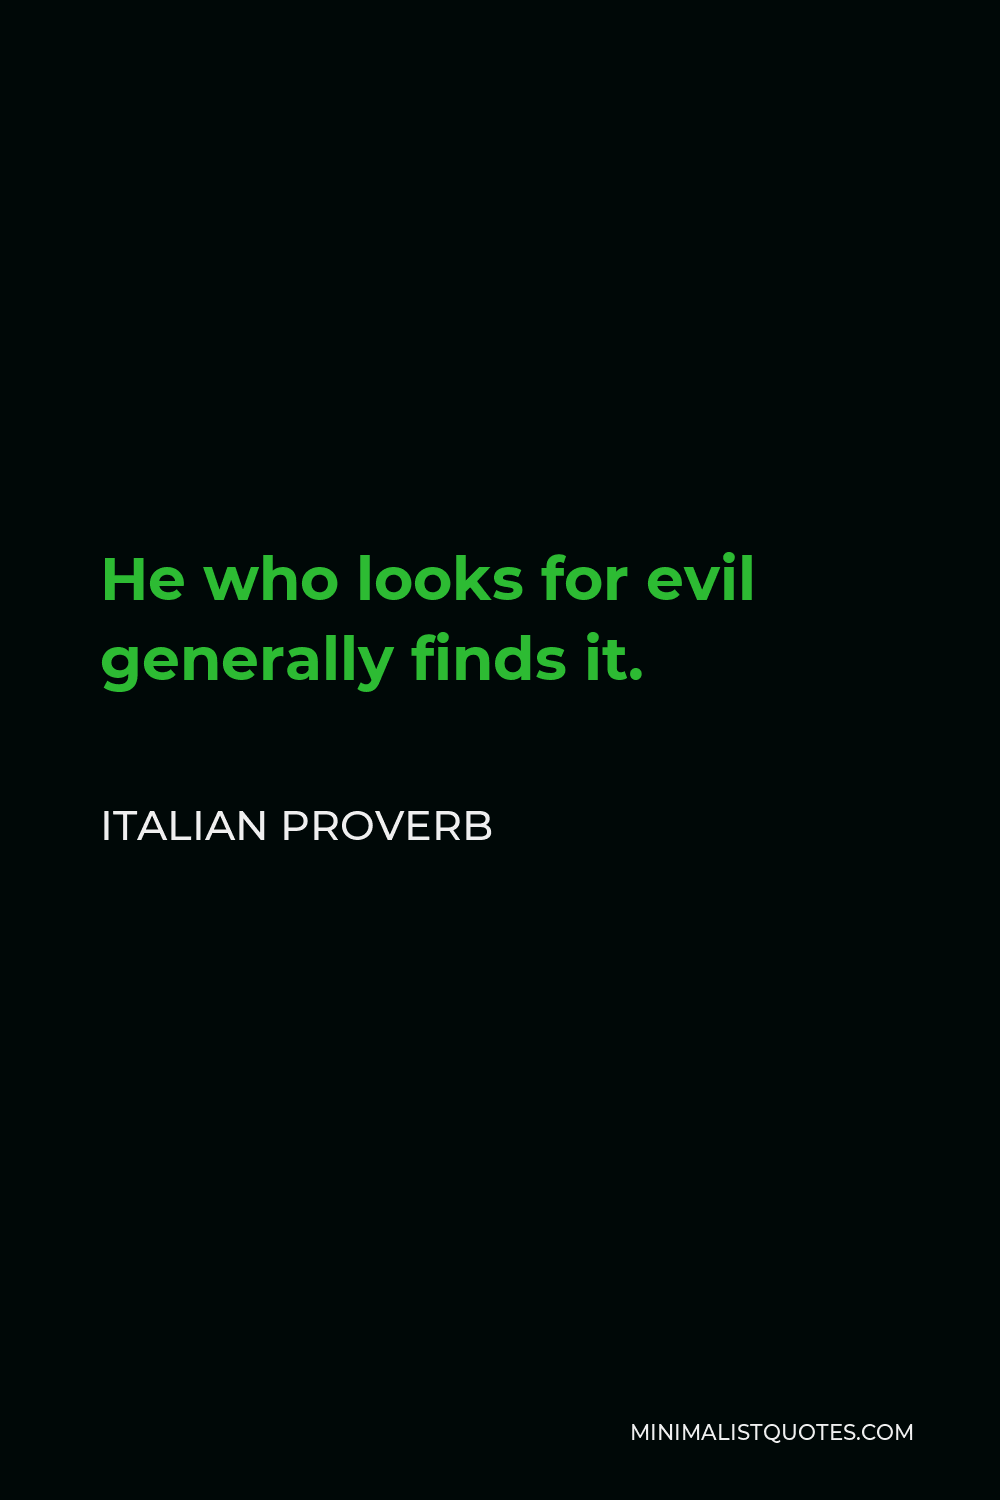 Italian Proverb Quote - He who looks for evil generally finds it.